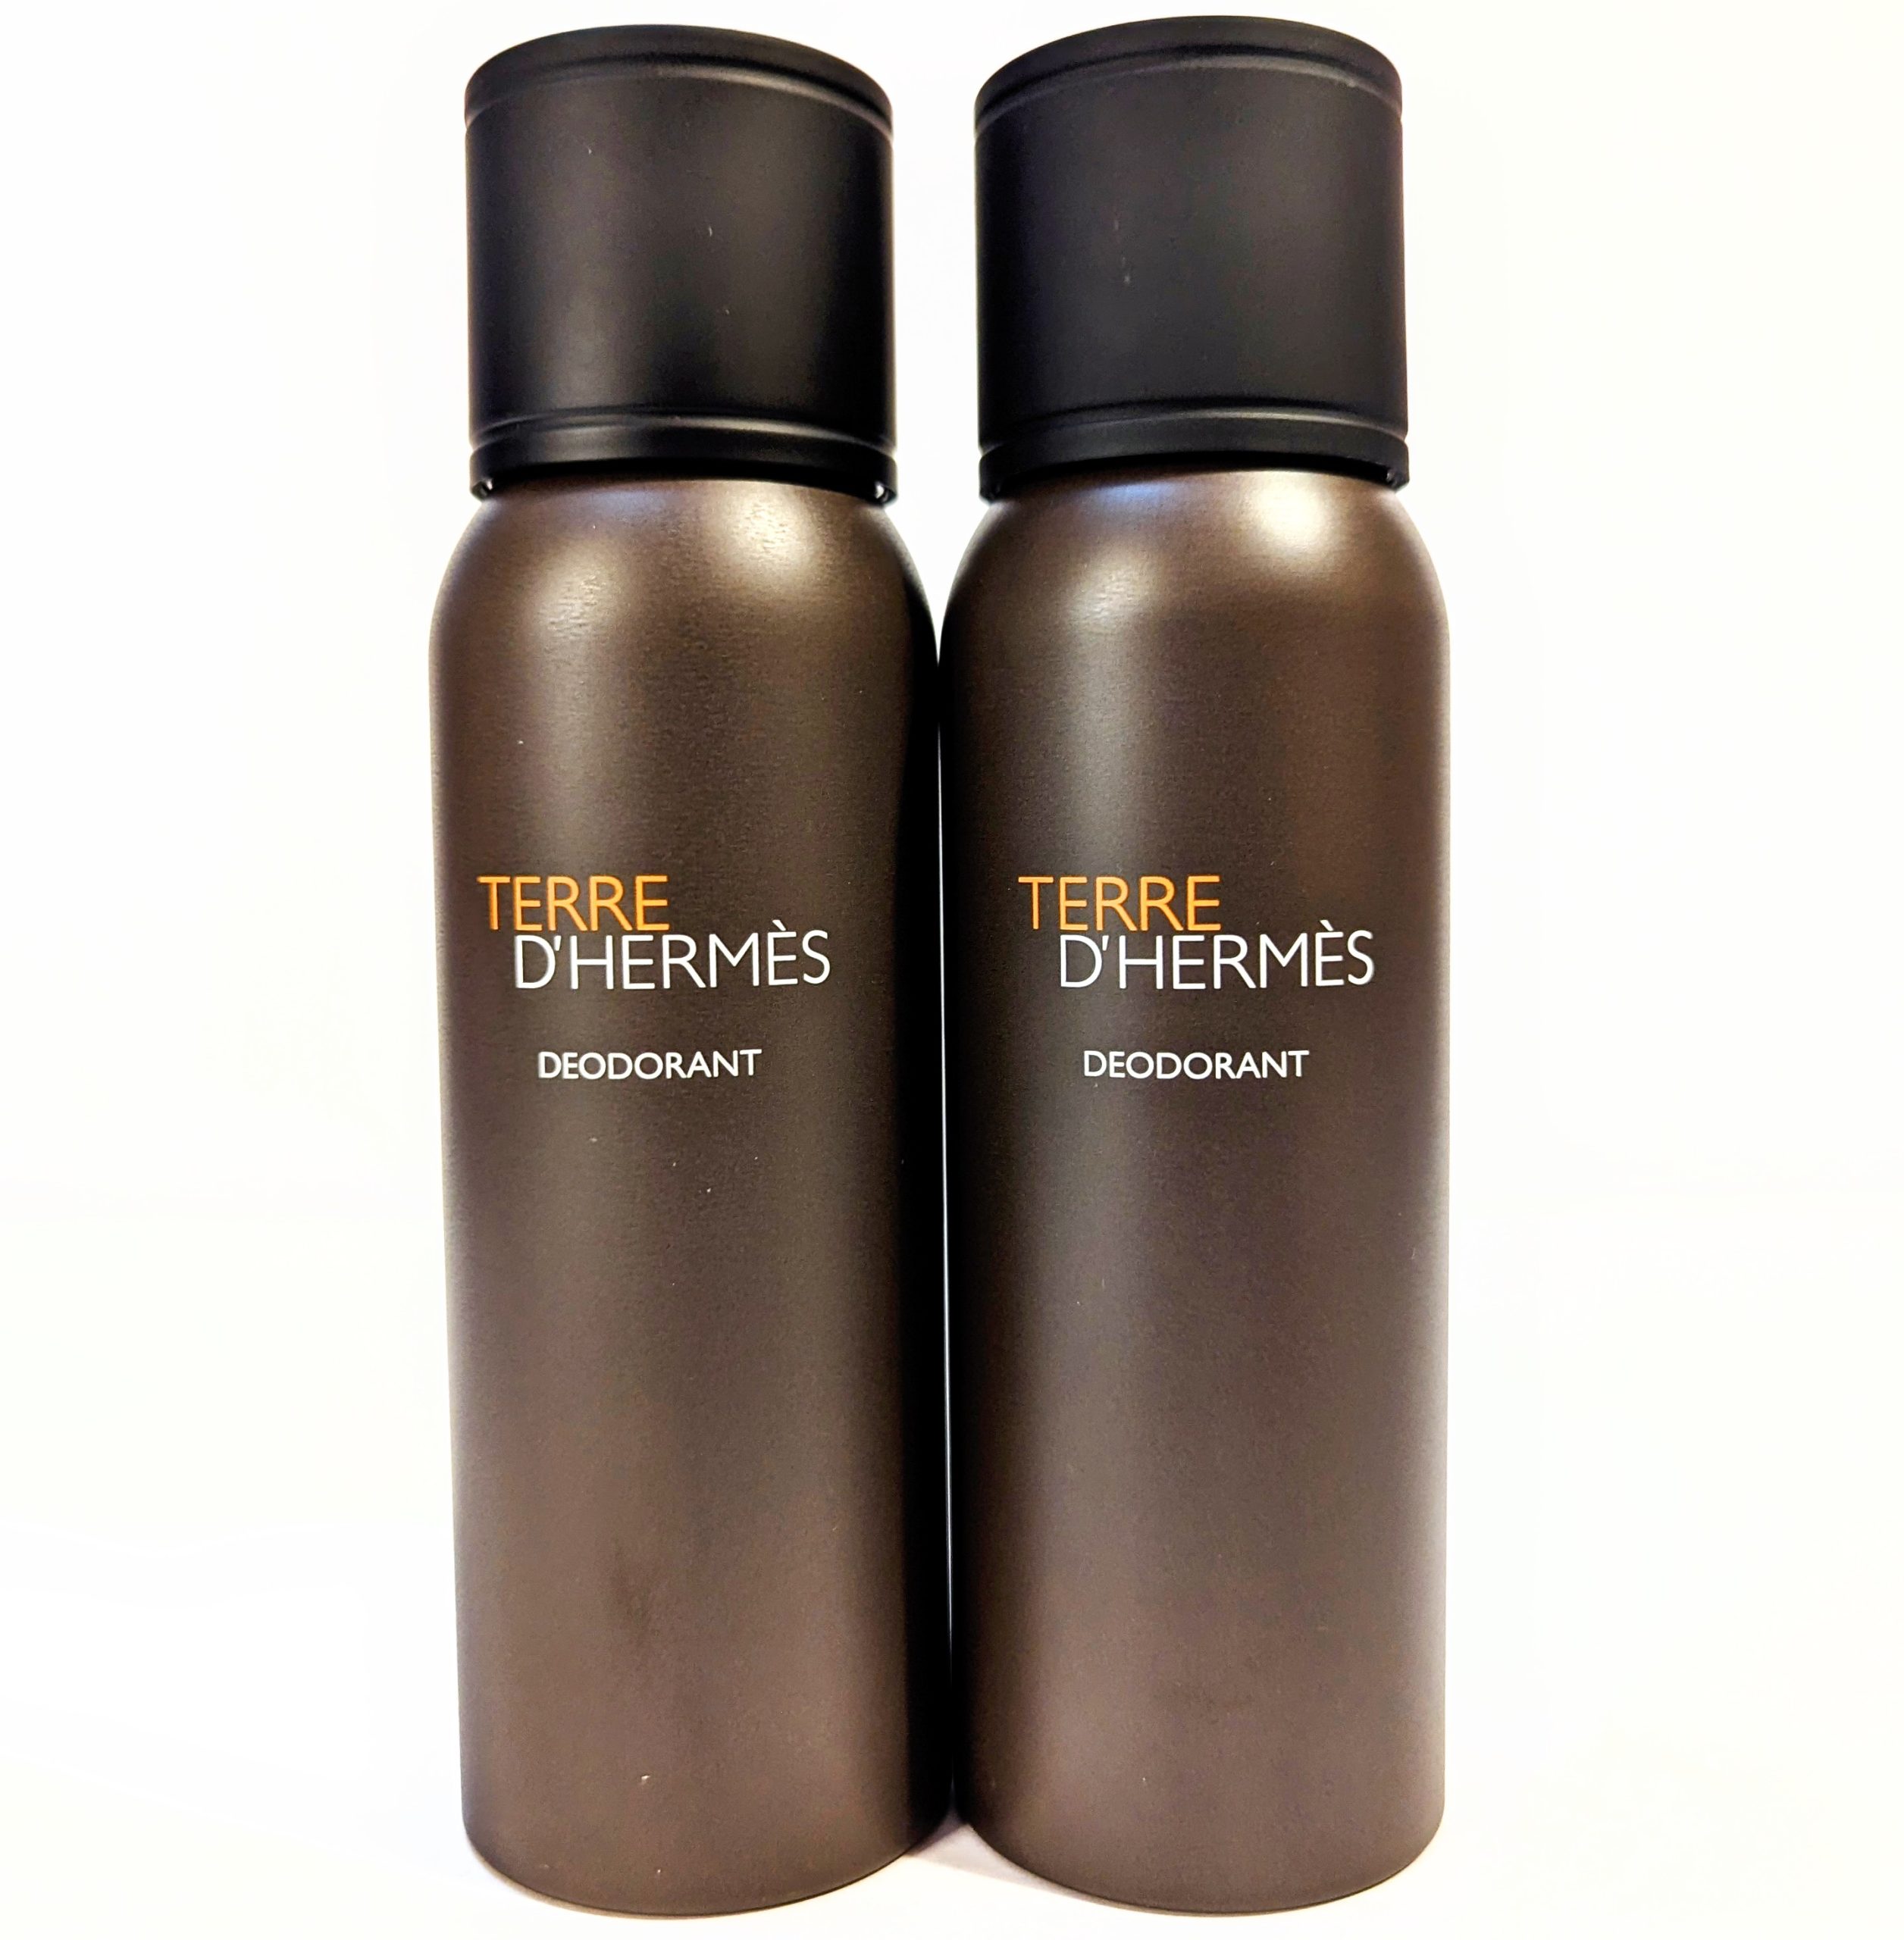 Two brown and black aerosol deodorant bottles with "Terre d'Hermès DEODORANT" written on the front.